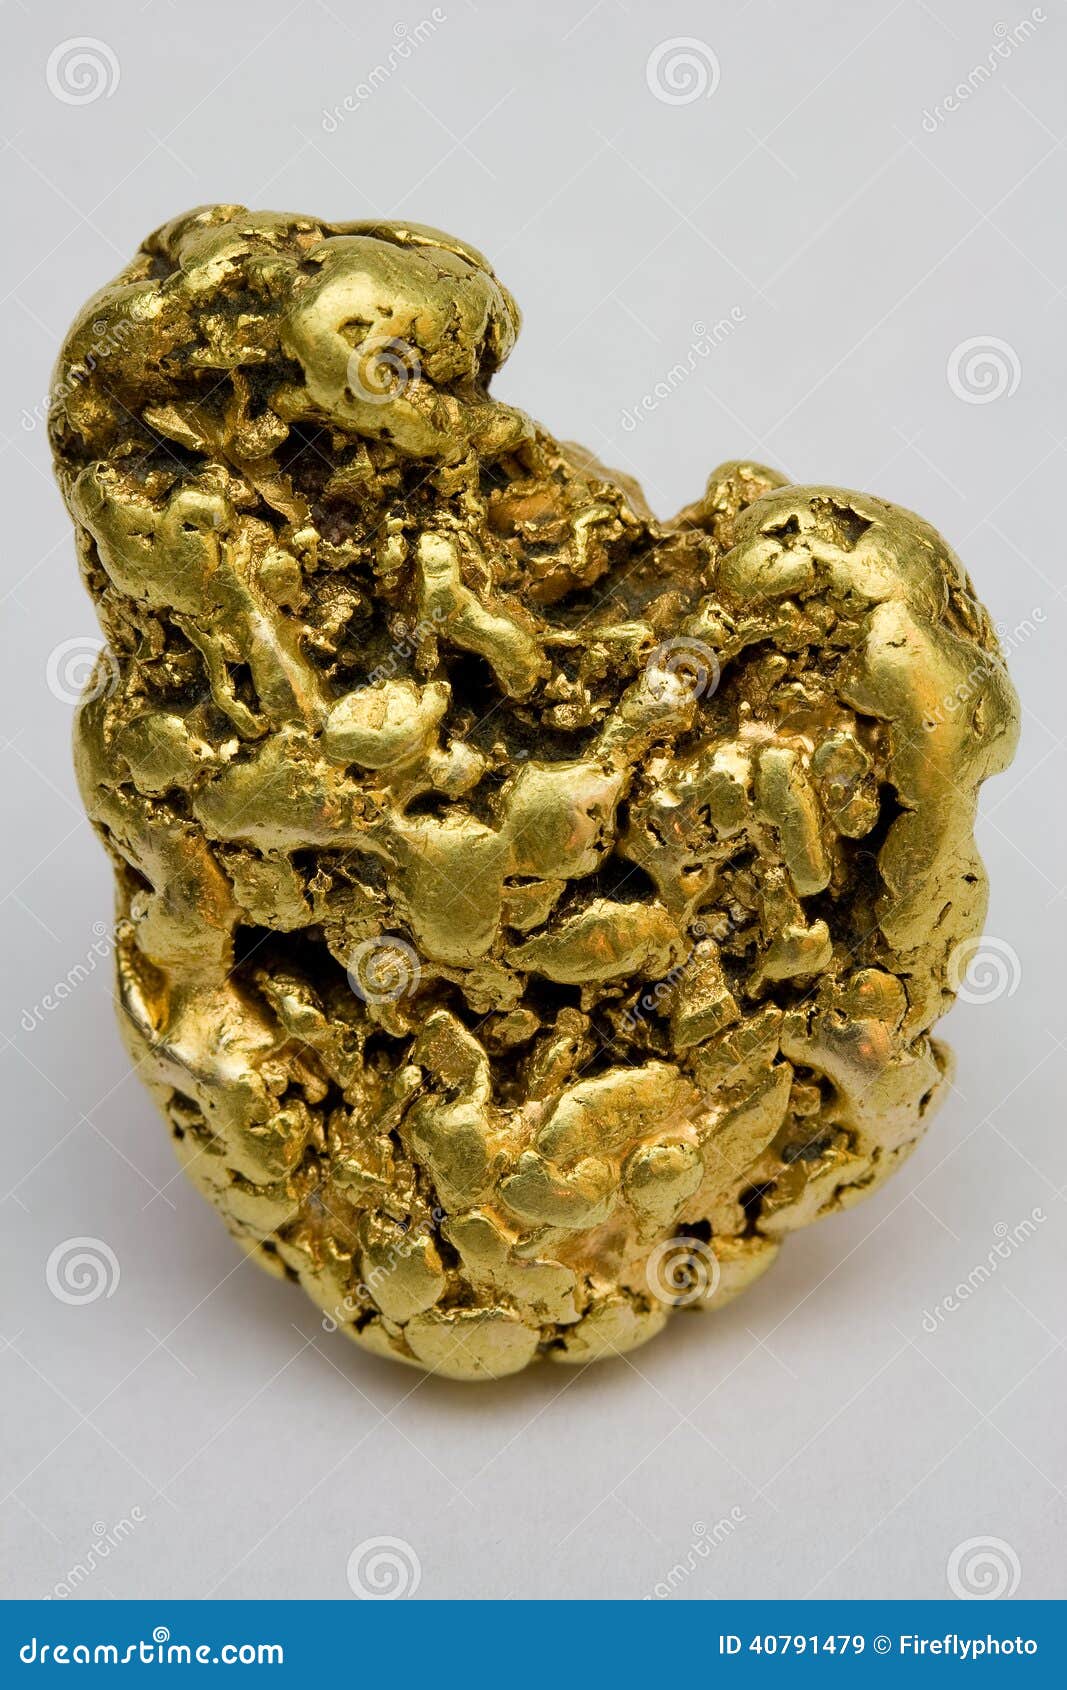 one troy ounce california gold nugget